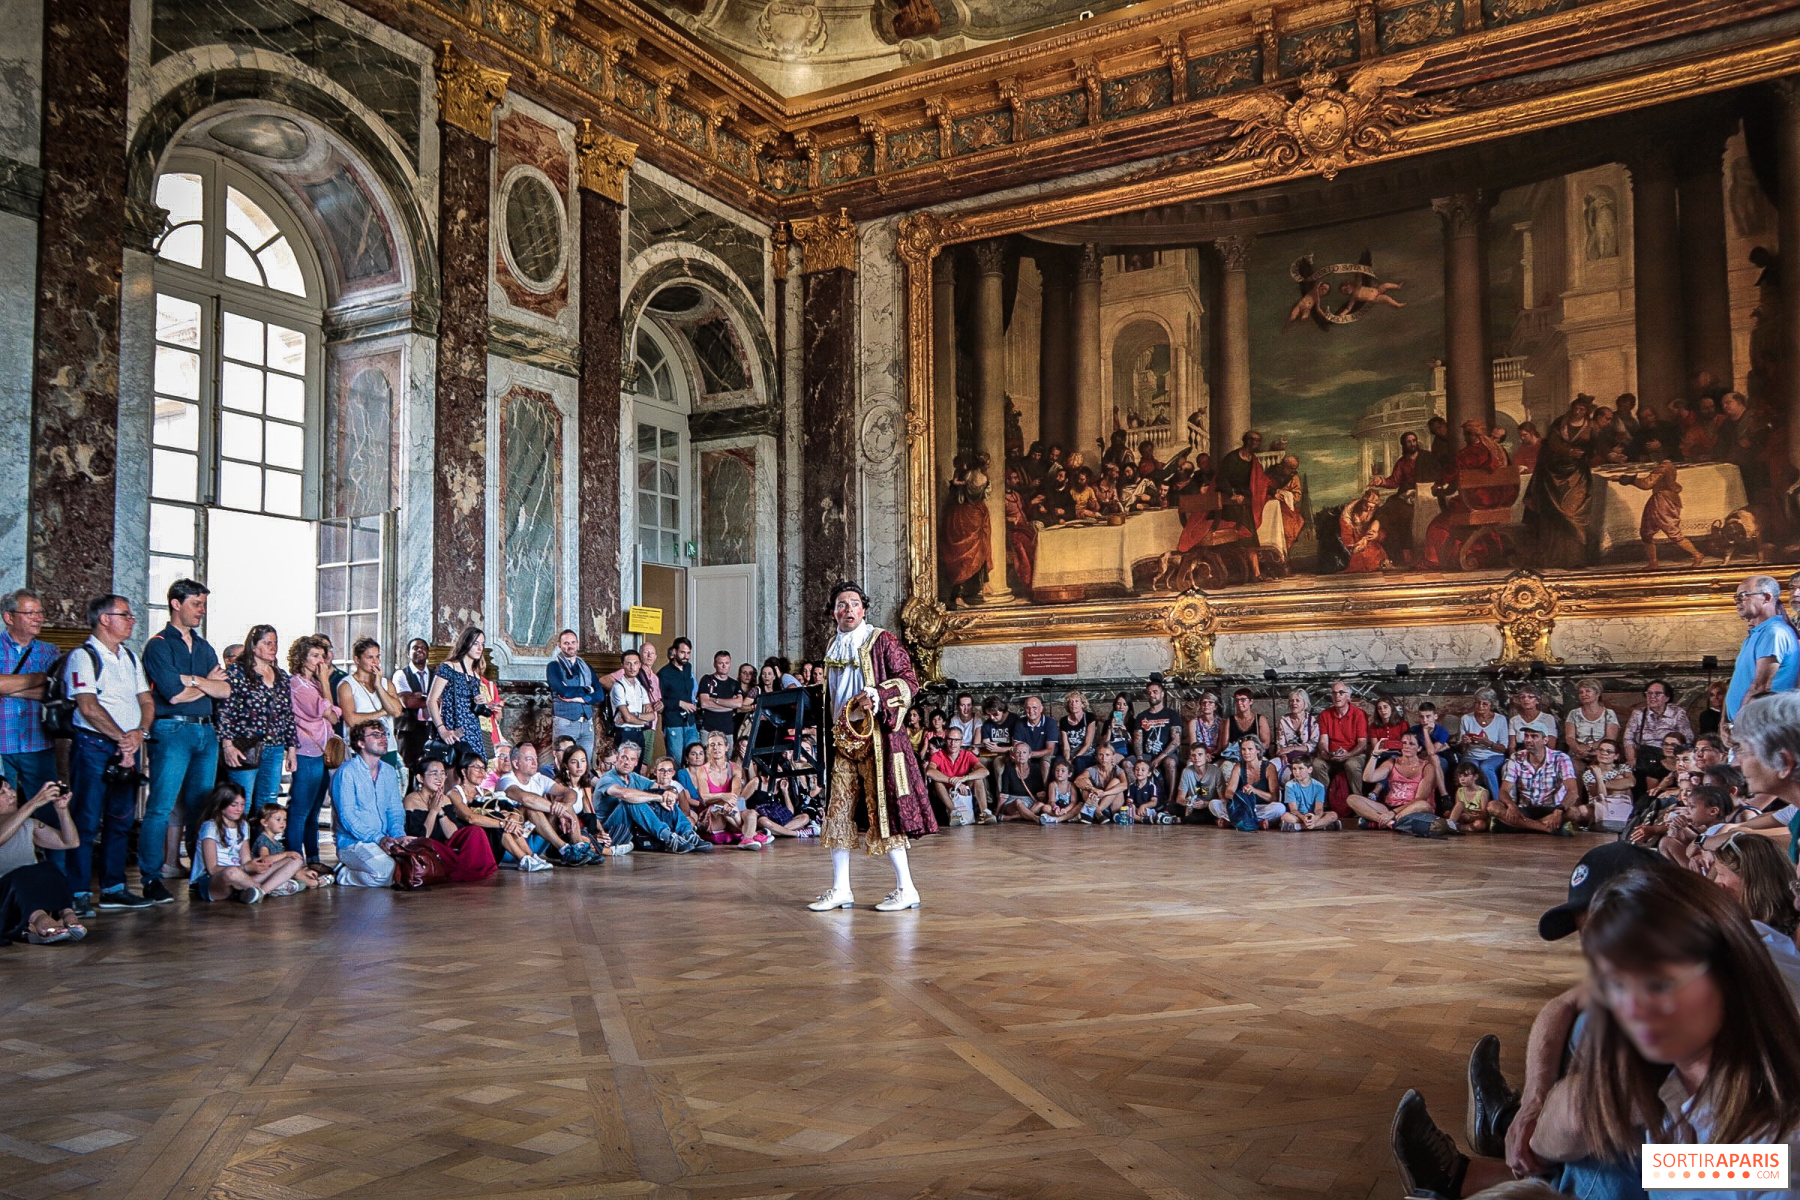 The Quirky Fashion of the Royal Court of Versailles